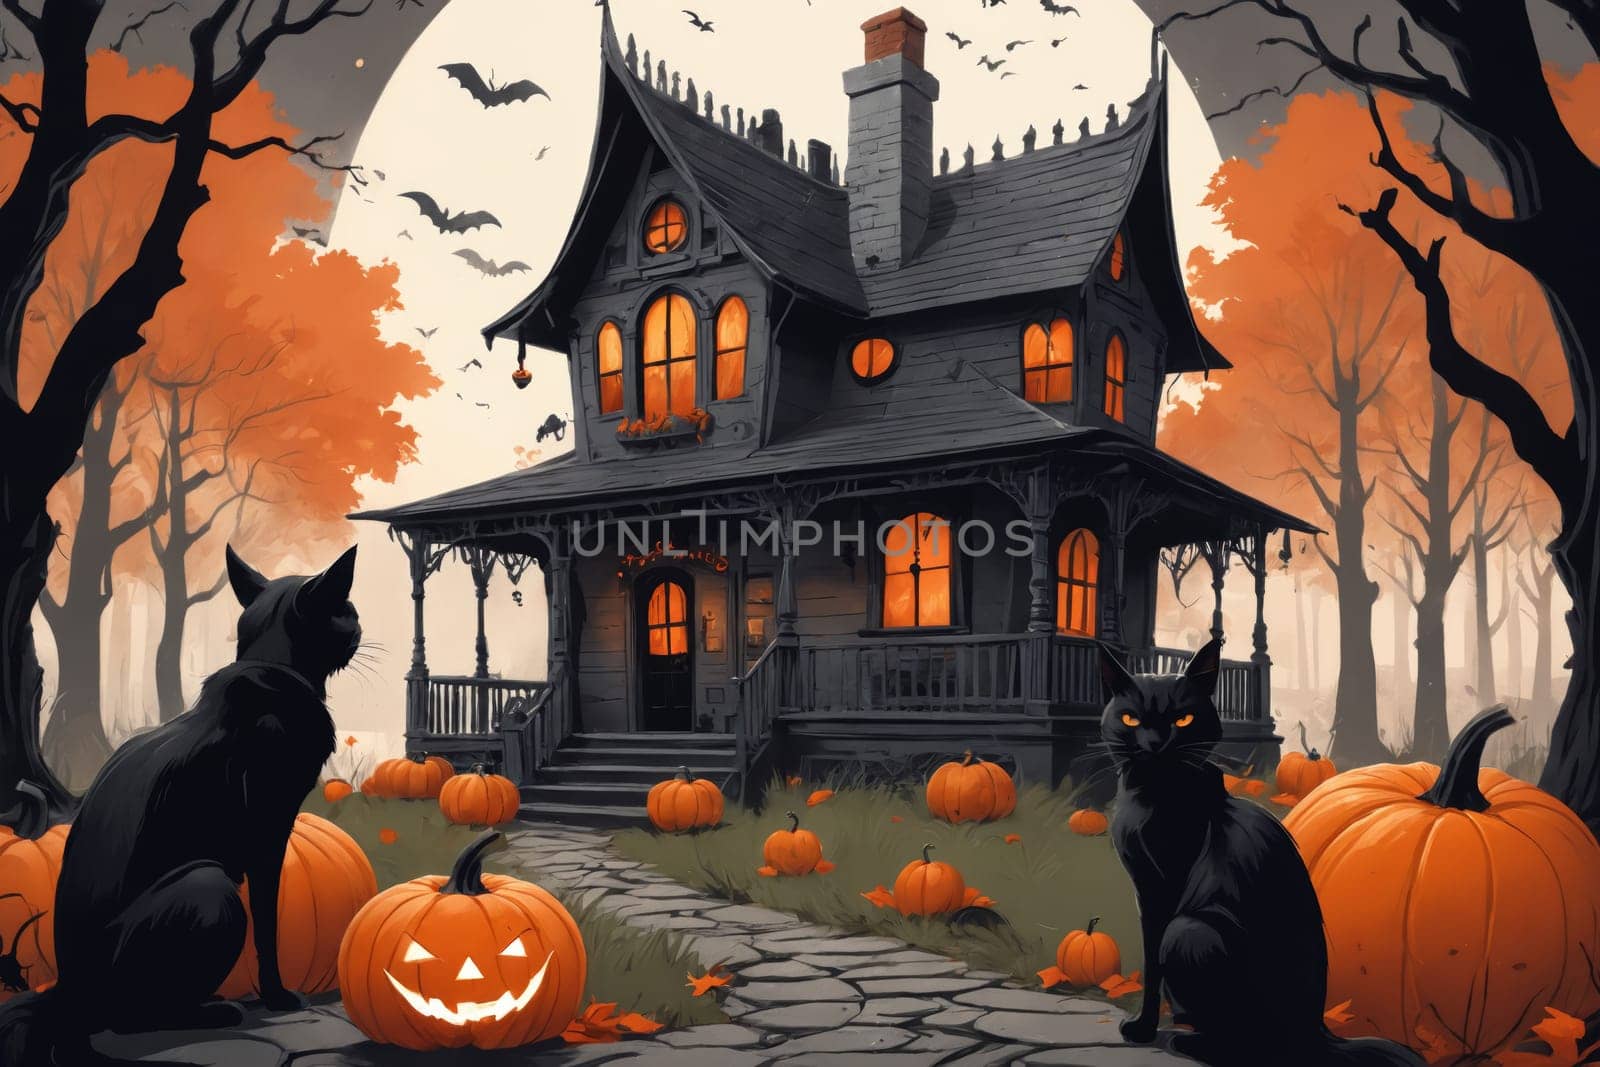 'Halloween Whimsy: A Decorated House and the Ominous Black Cat'. by Andre1ns